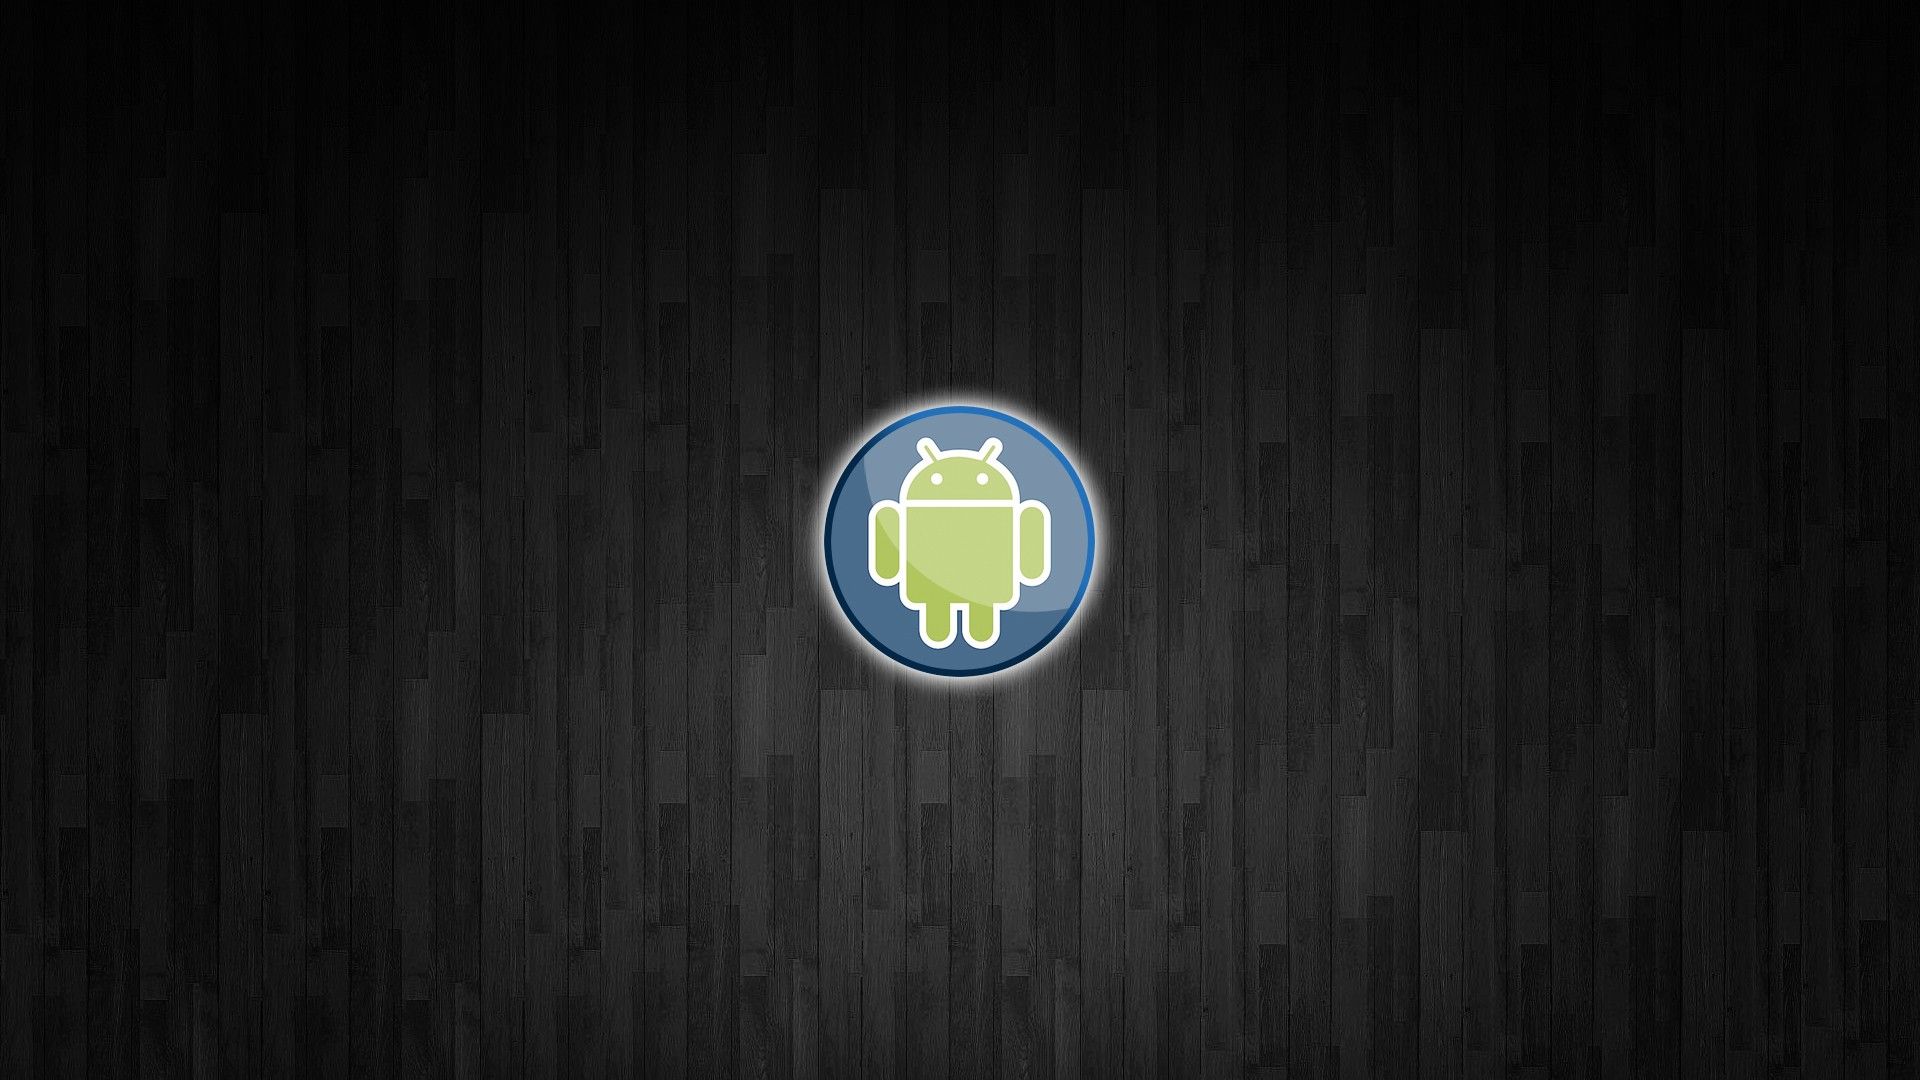 Wallpapers For Desktop Android